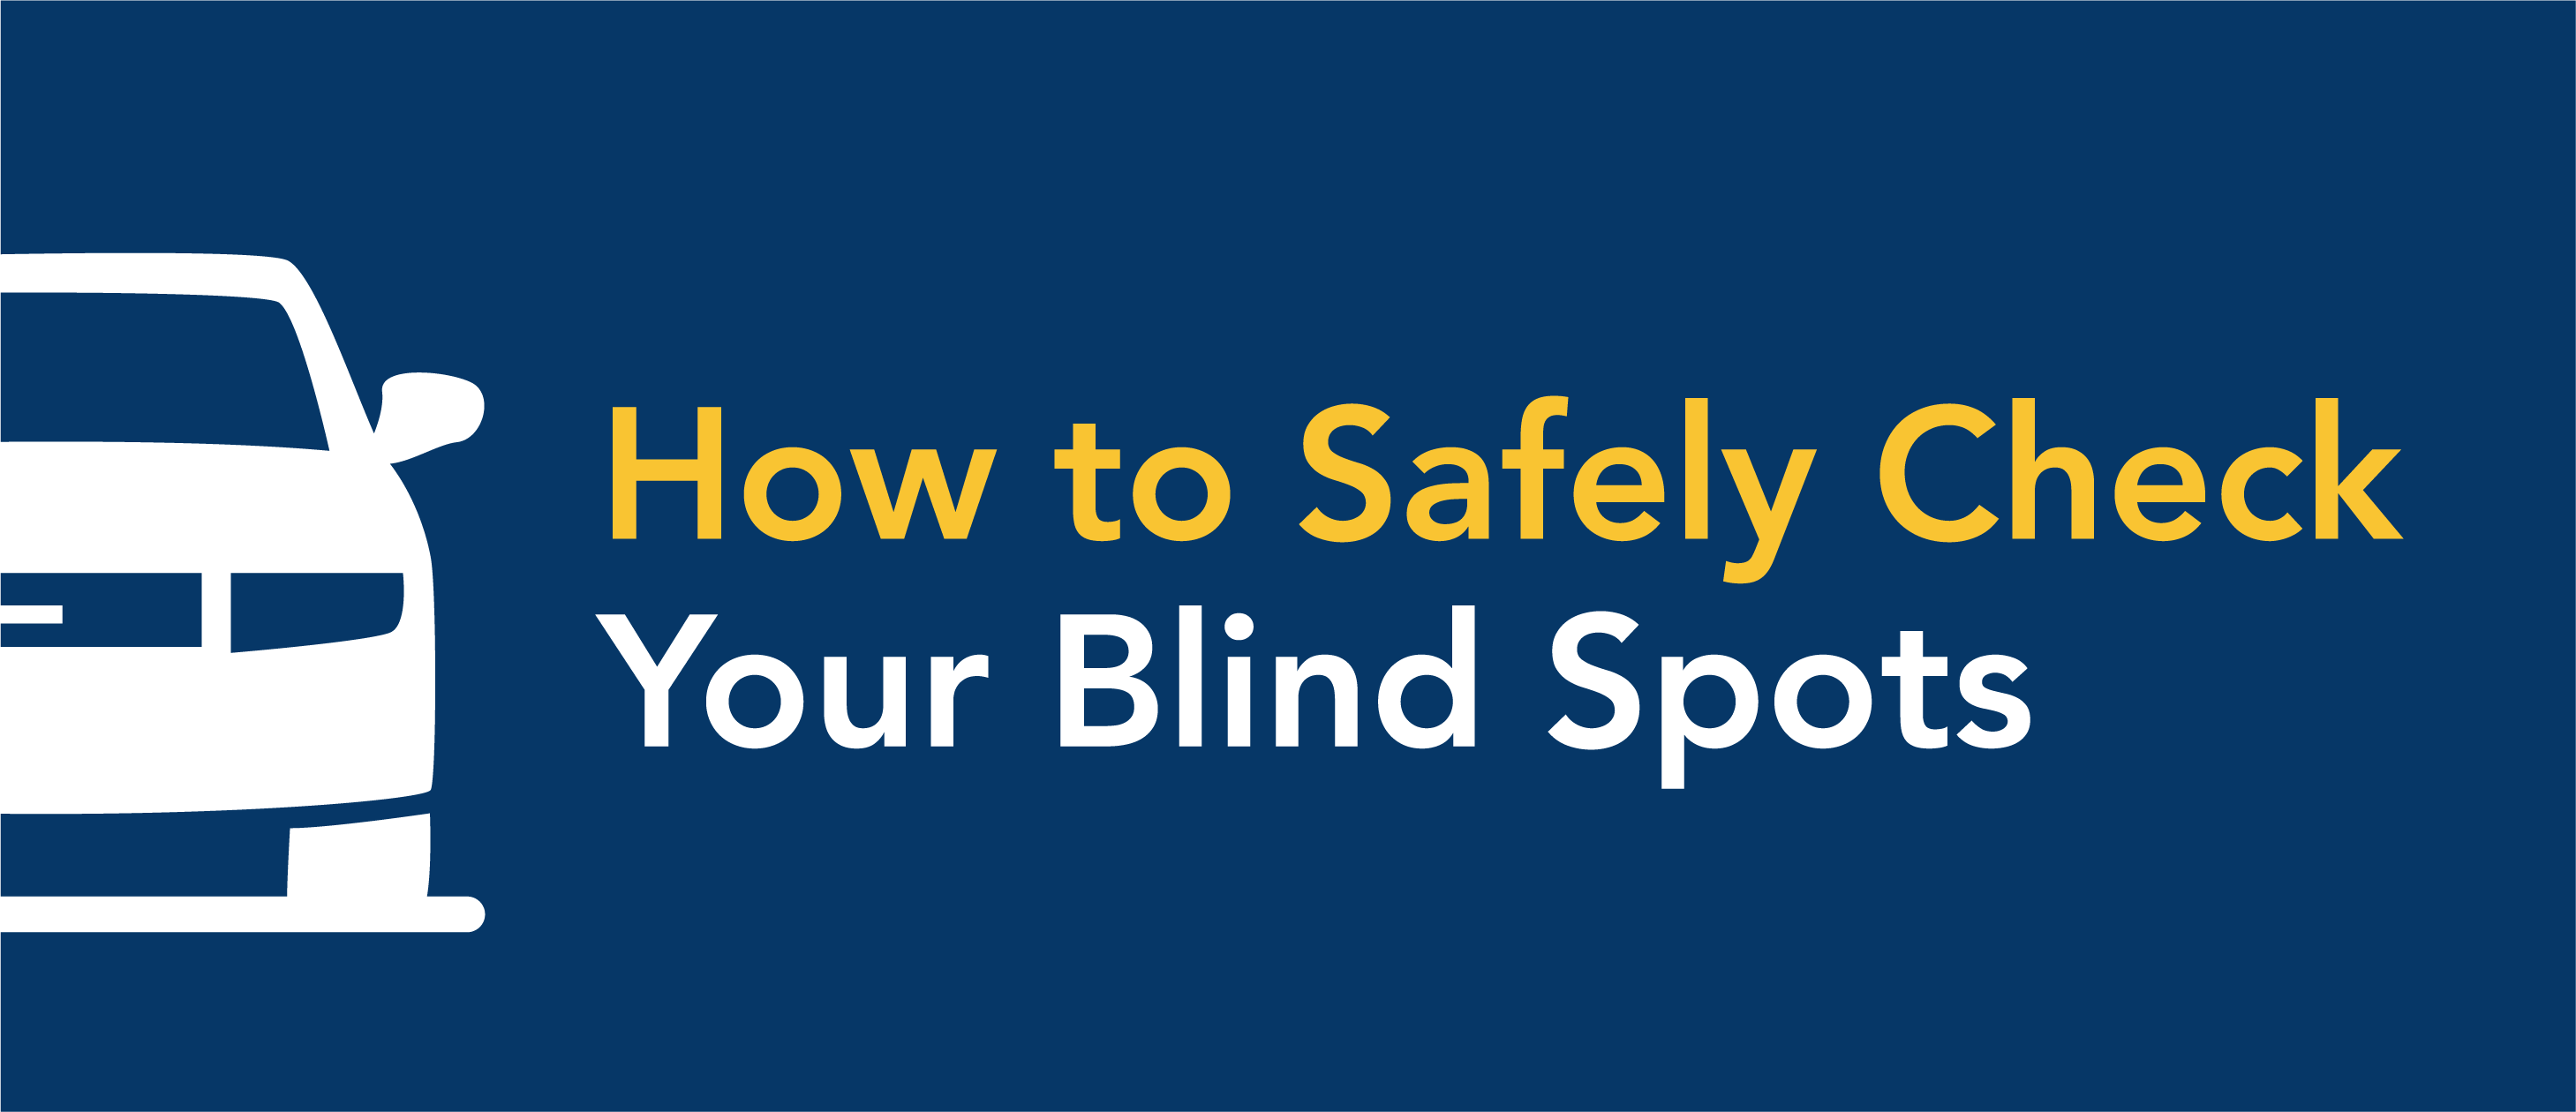 How to safely check your blind spots